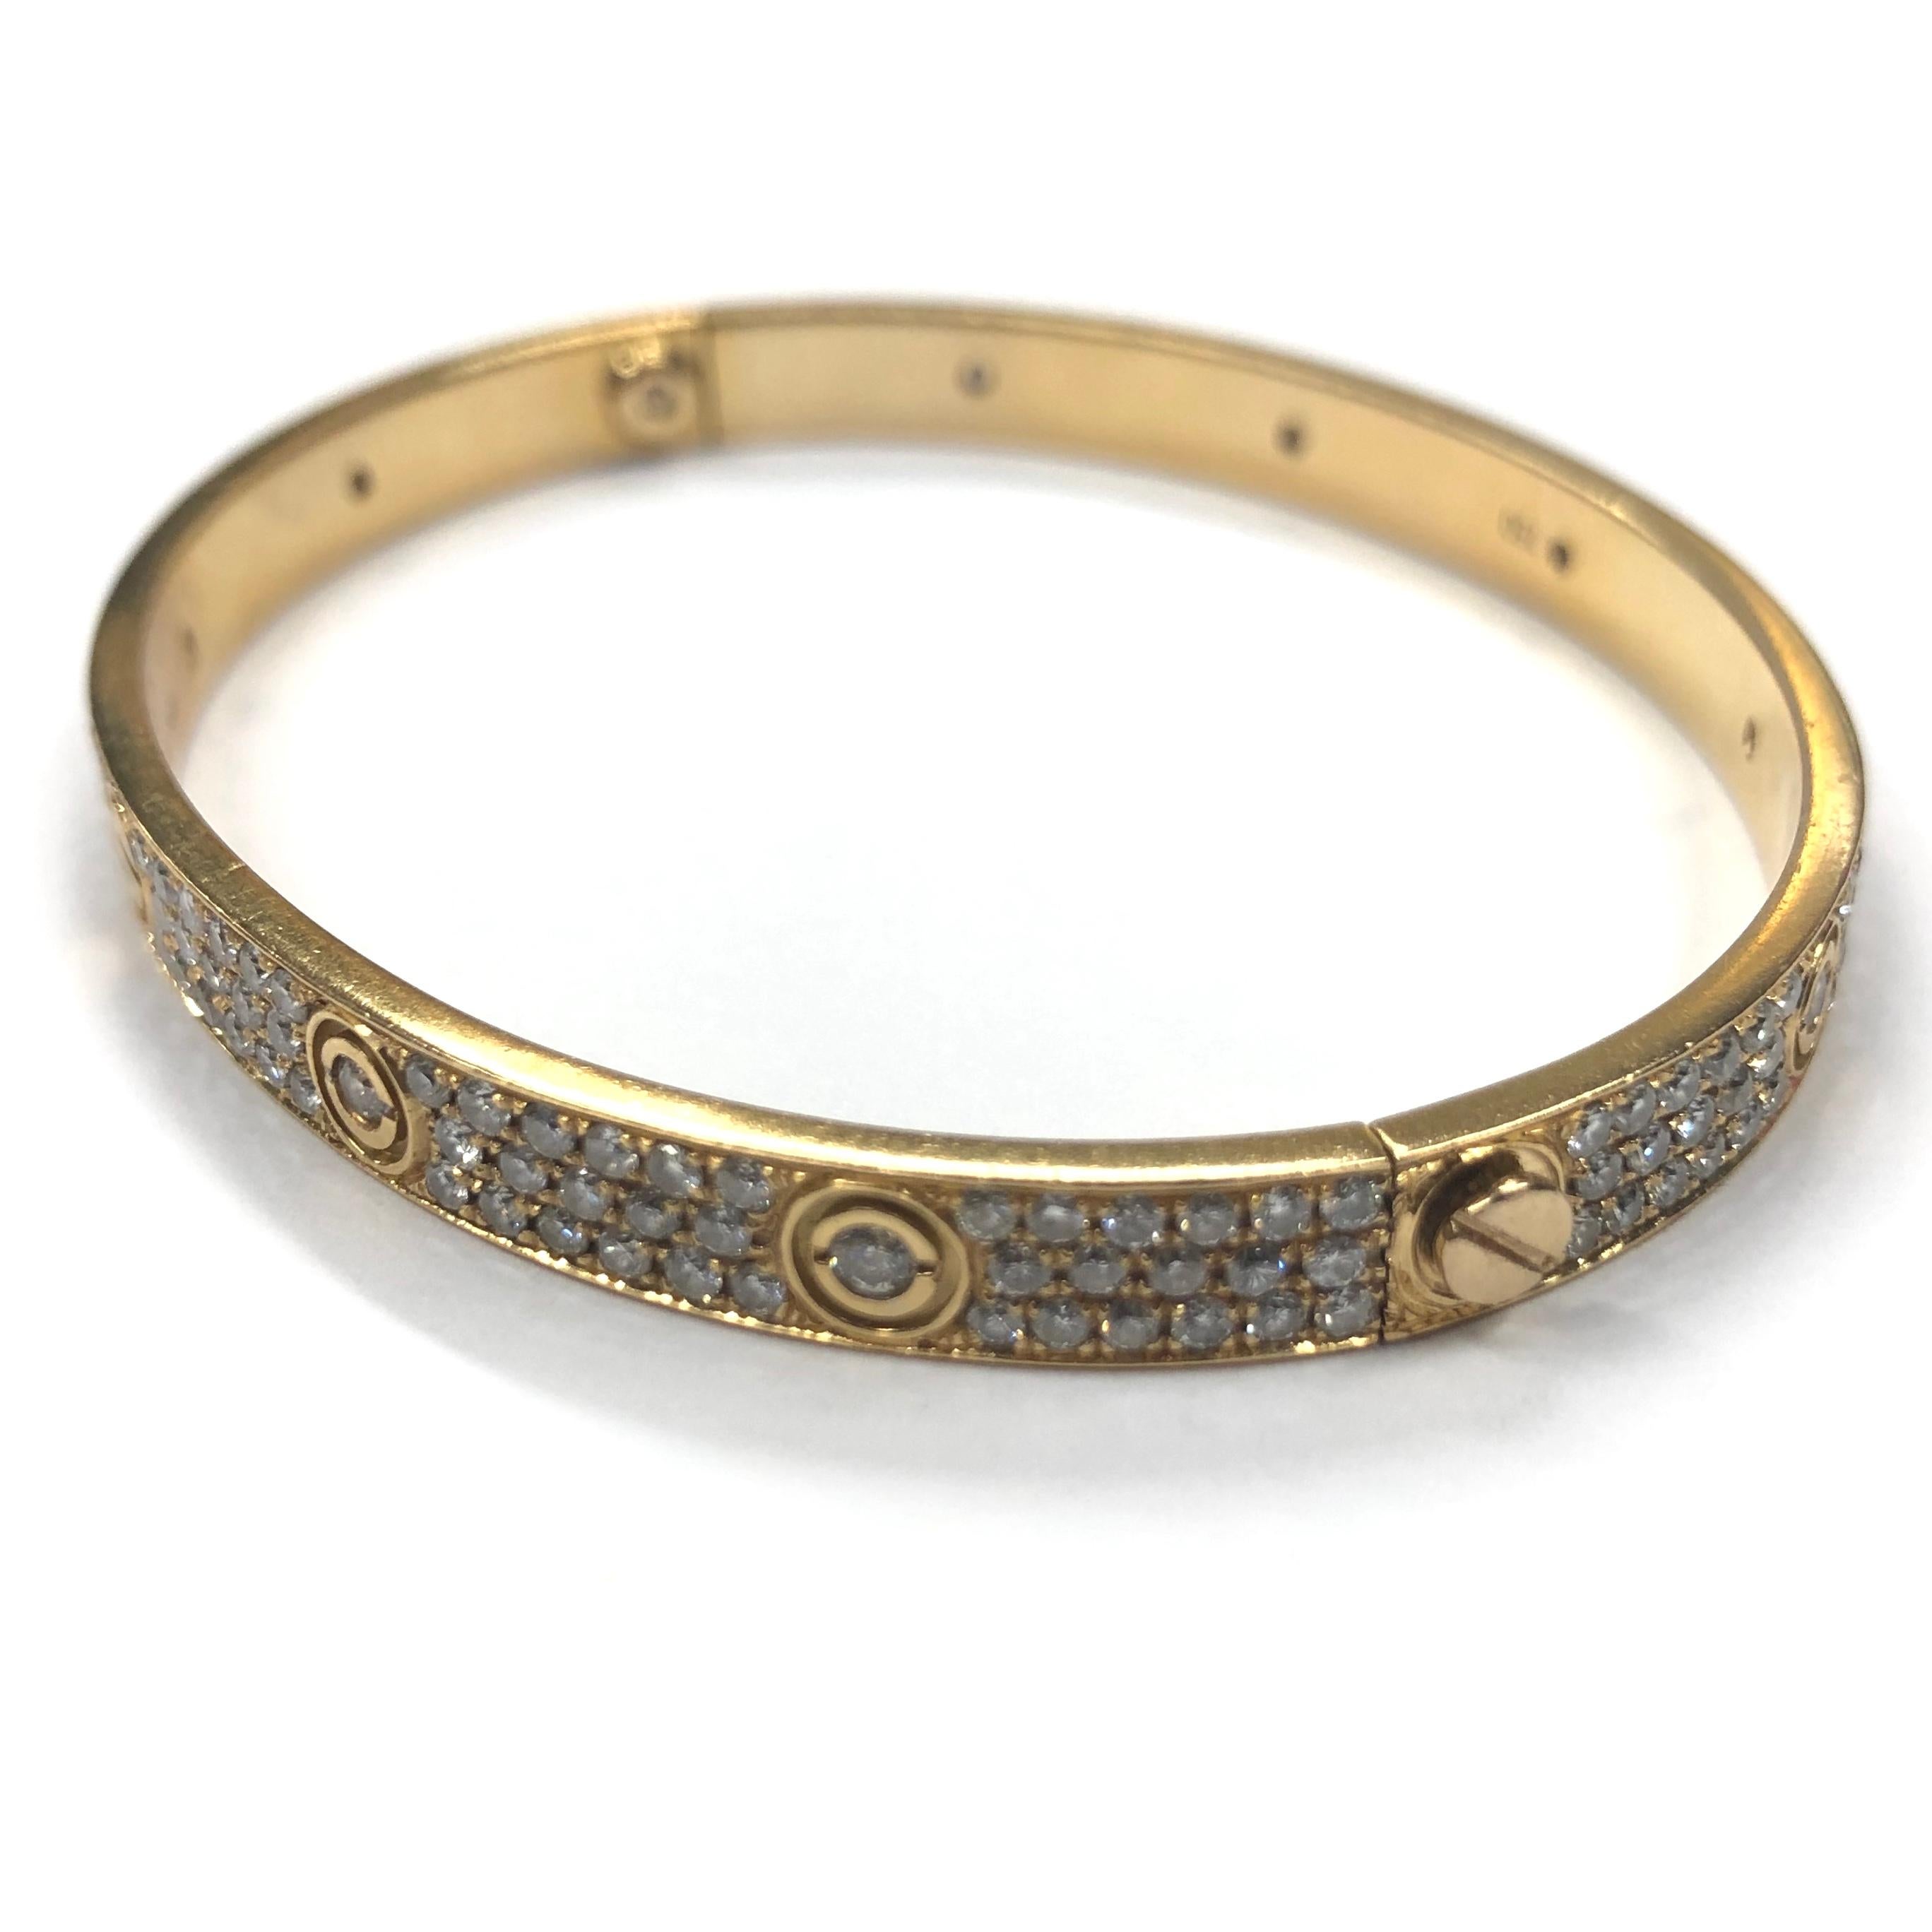 18ct Yellow Gold Diamond Cartier Love Bangle. Set with three rows of round brilliant cut diamonds and nine round brilliant cut diamonds in the screws.

Approximate total Diamond weight : 5.00ct
Bangle size : 20
Total weight : 29.3g